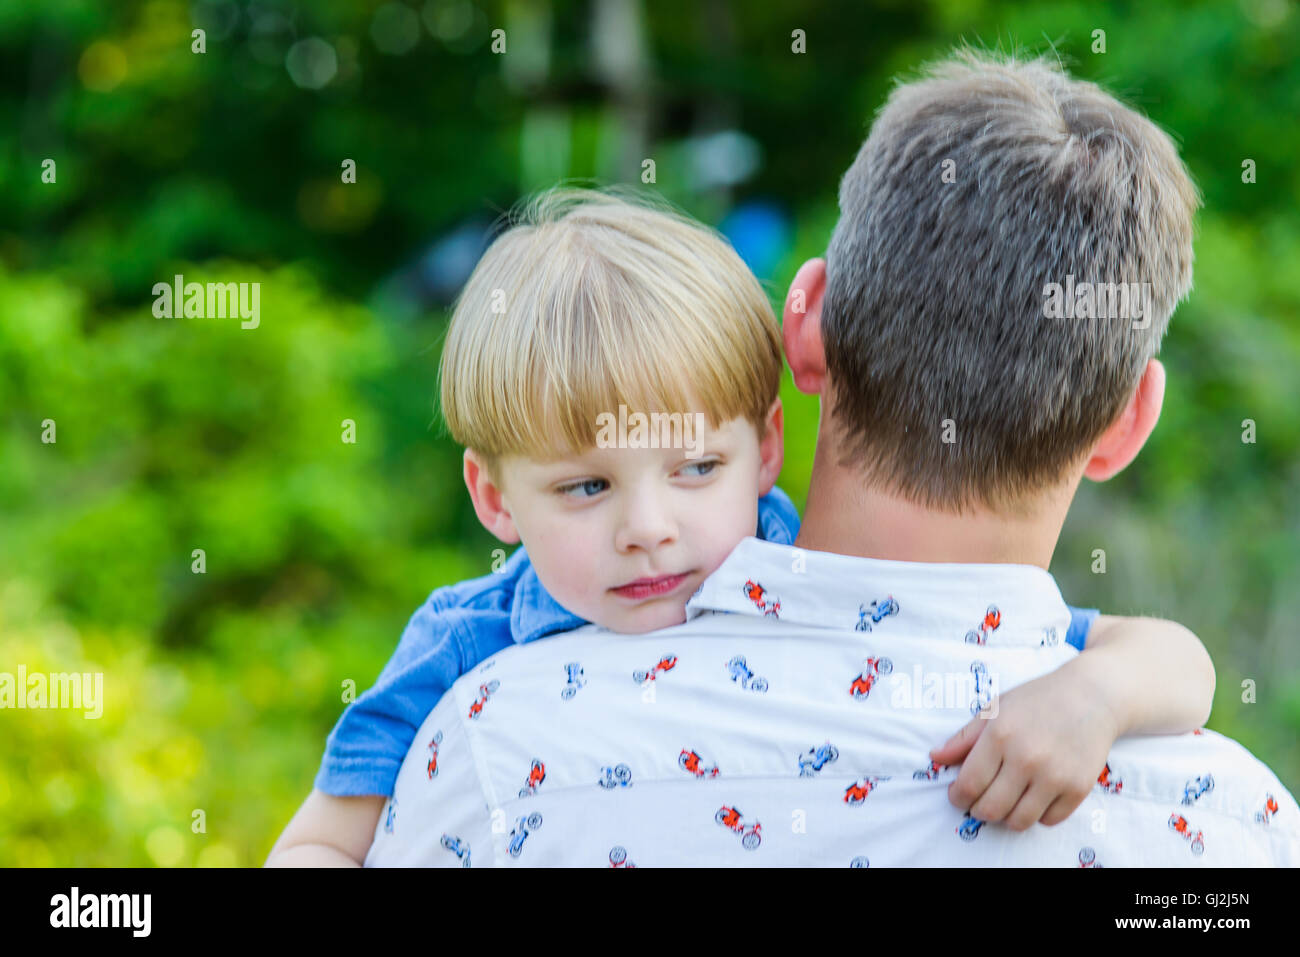 Boy looking away over fathers shoulders Stock Photo